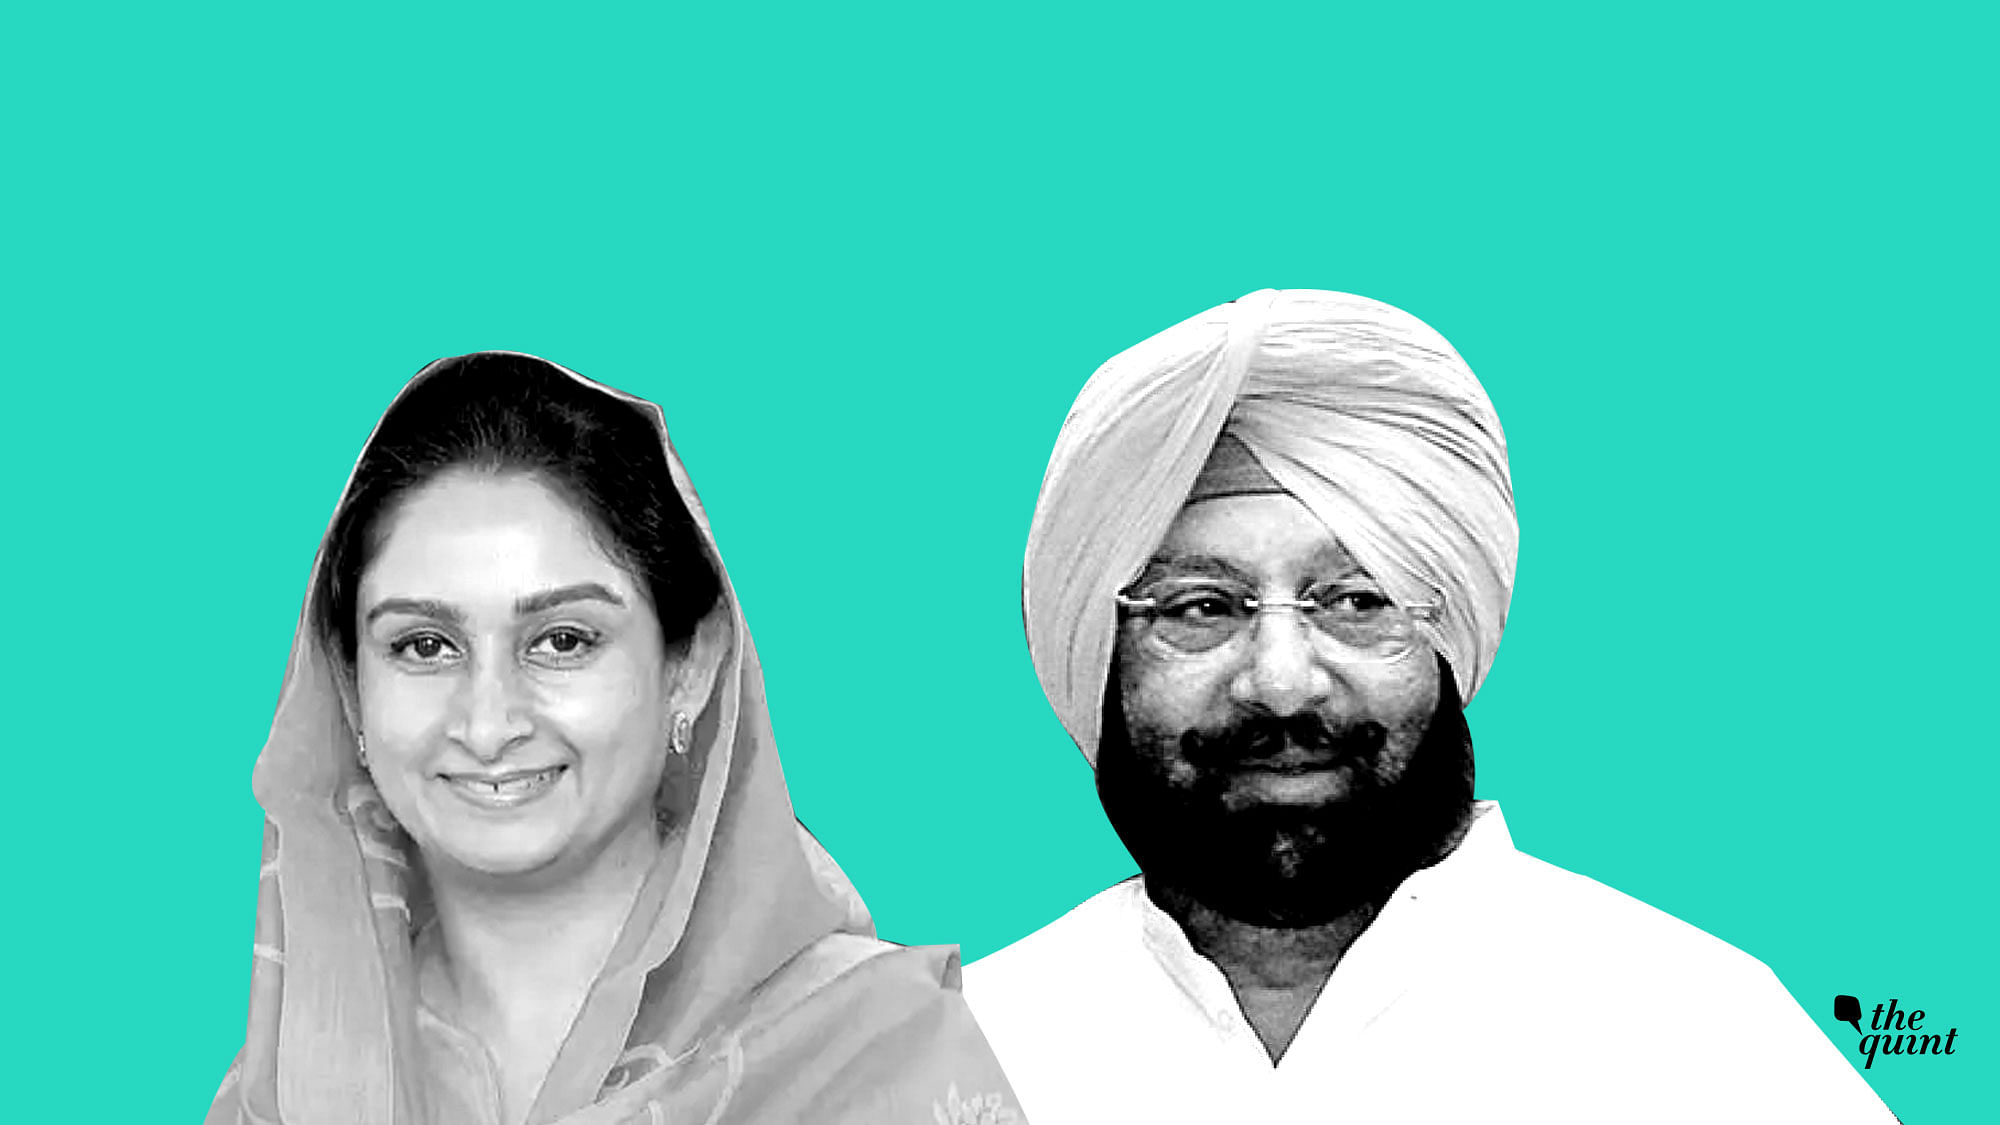 Harsimrat Kaur Badal criticised Amarinder Singh for not seeking an apology from the Gandhi family for Operation Blue Star.